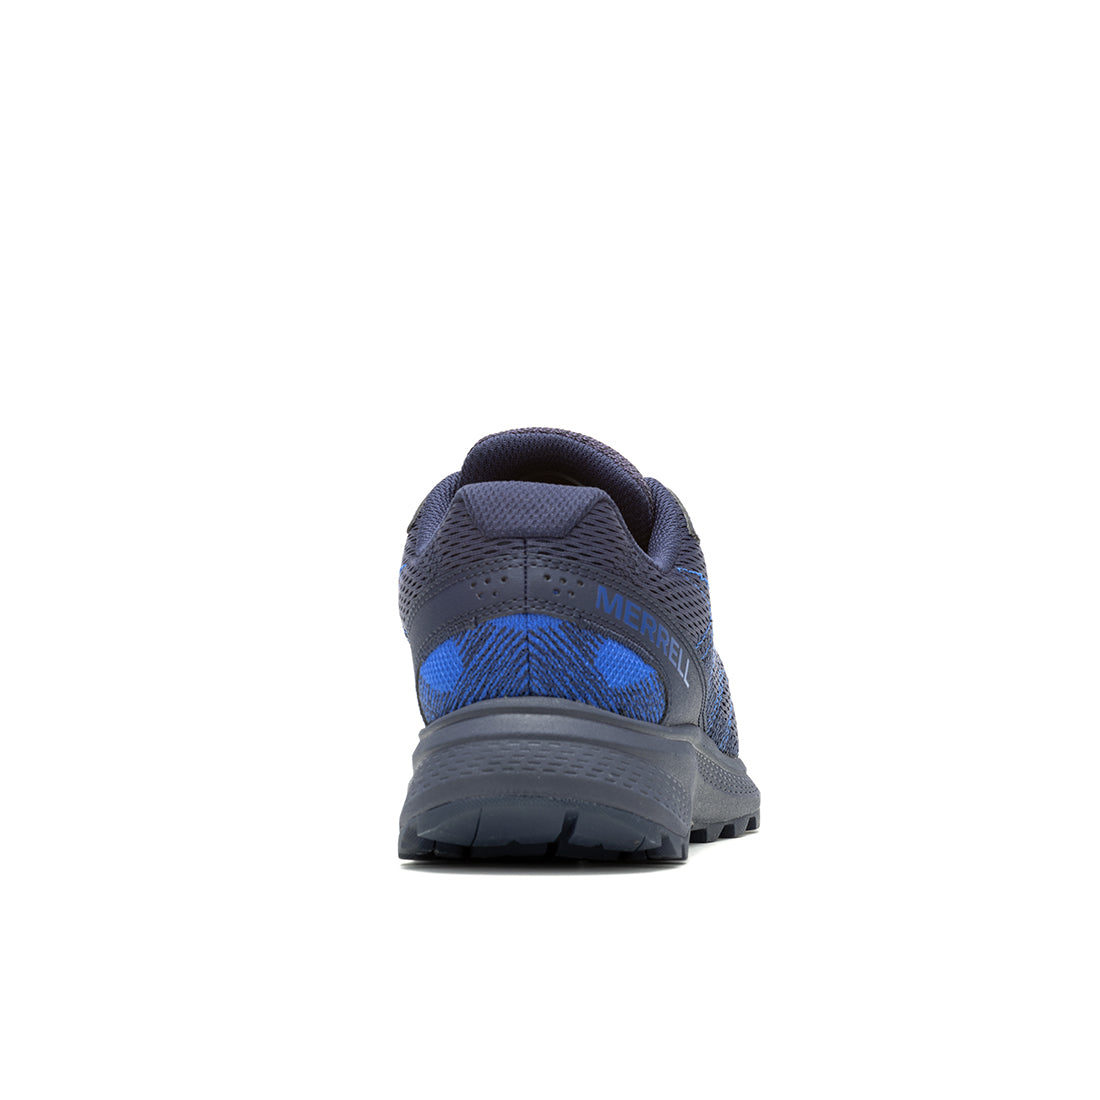 Fly Strike - Sea/Navy Mens Trail Running Shoes